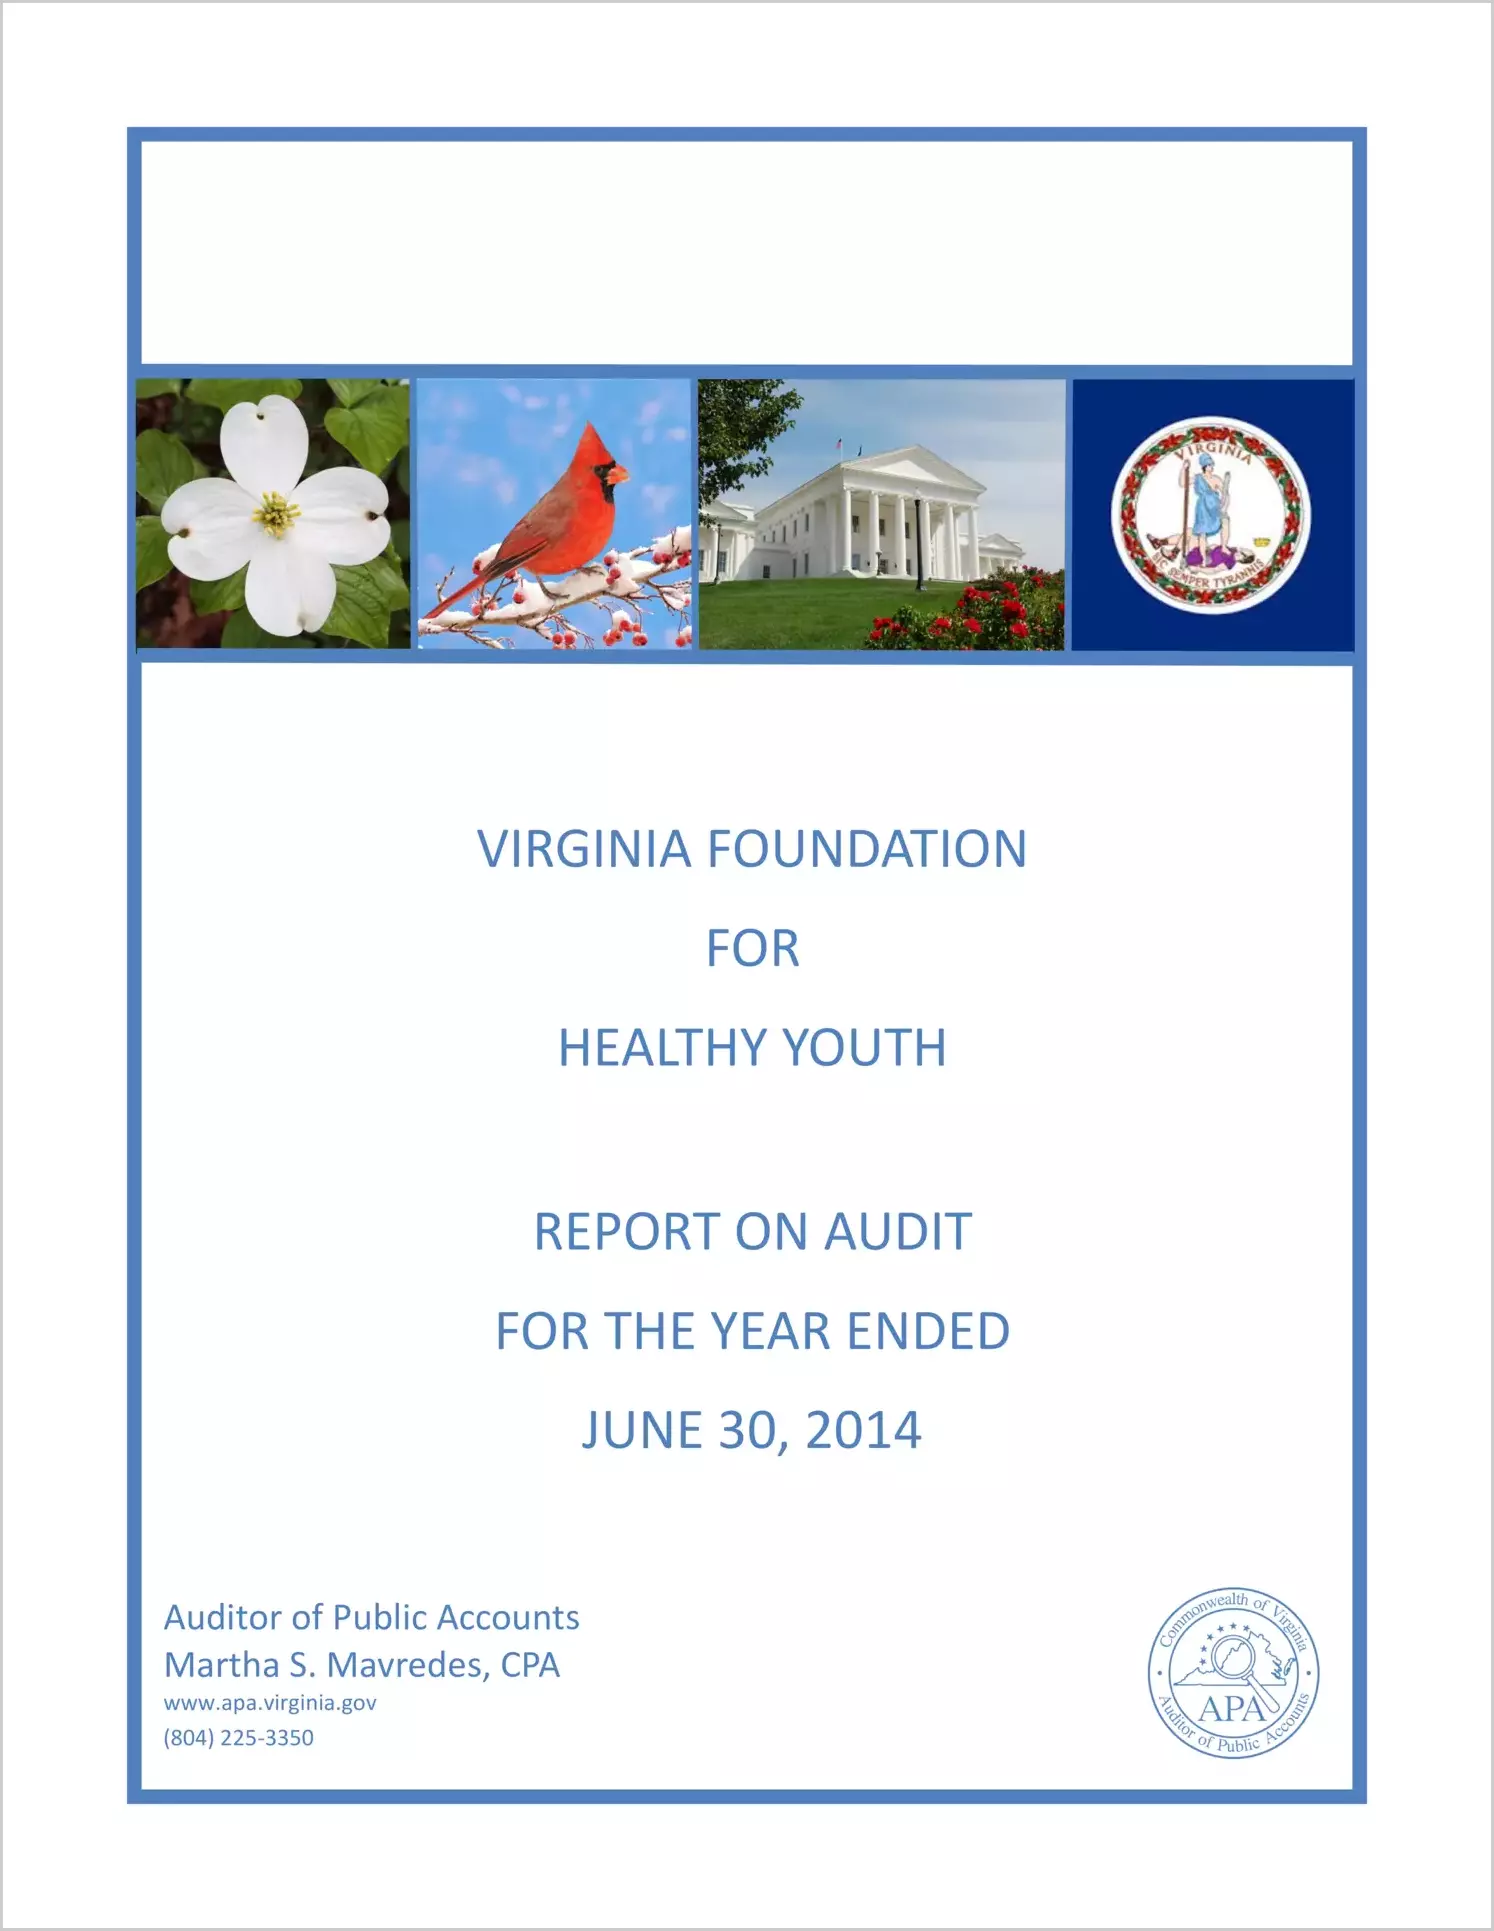 Foundation for Healthy Youth for the year ended June 30, 2014